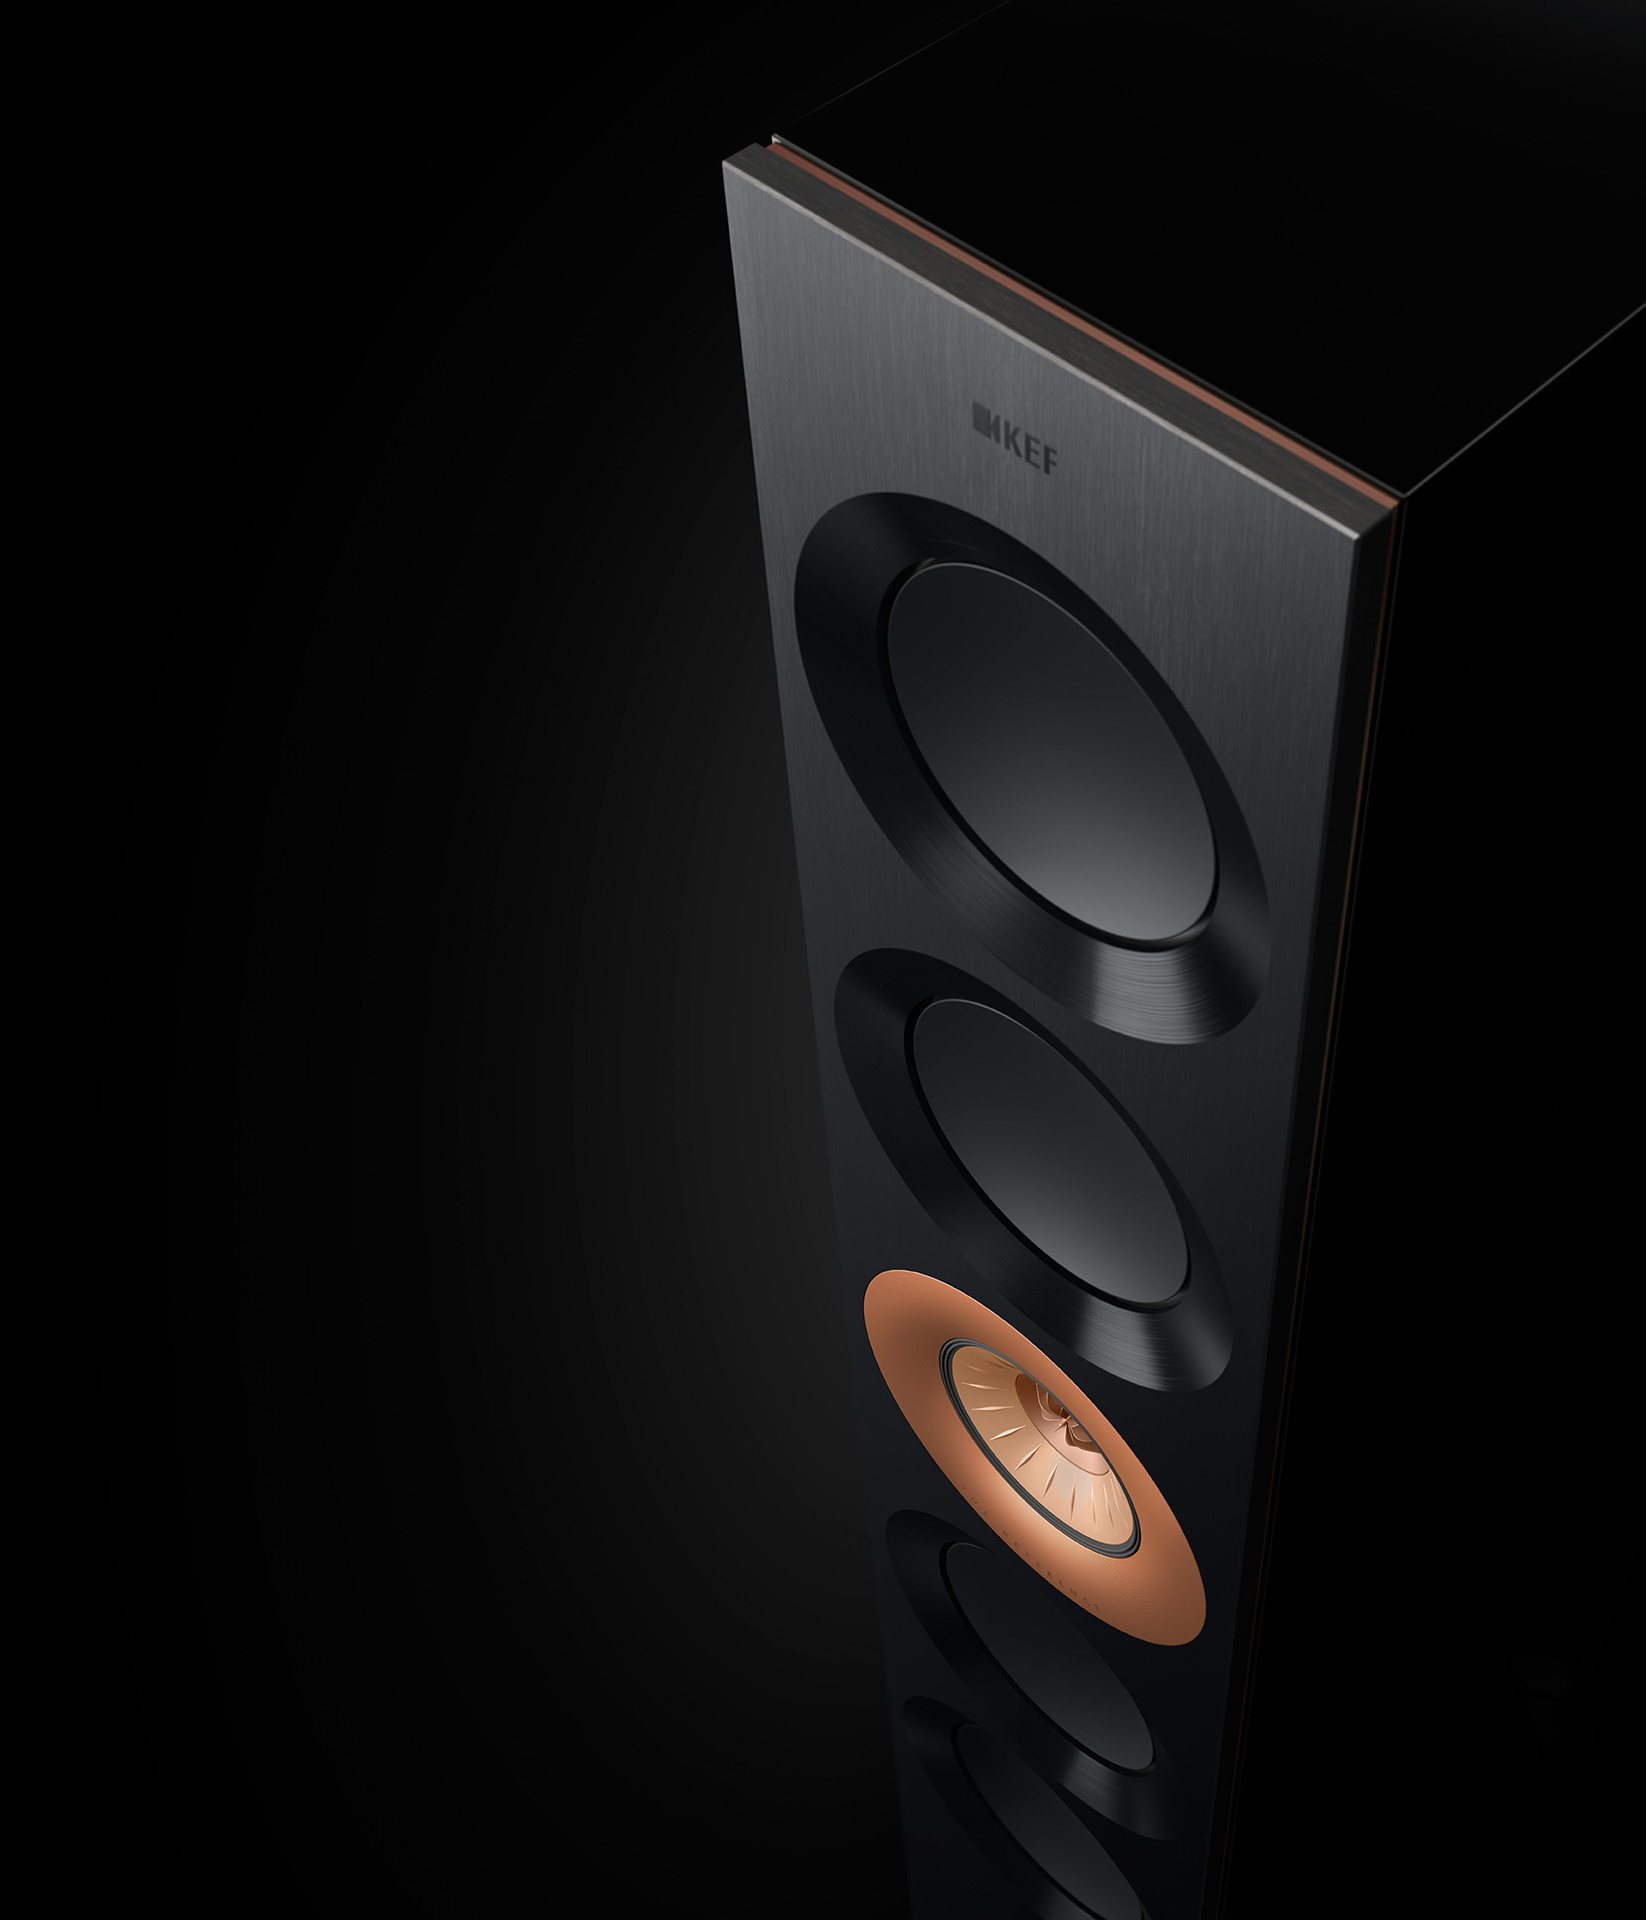 REFERENCE 5 Meta detailed view perspective front high gloss black copper